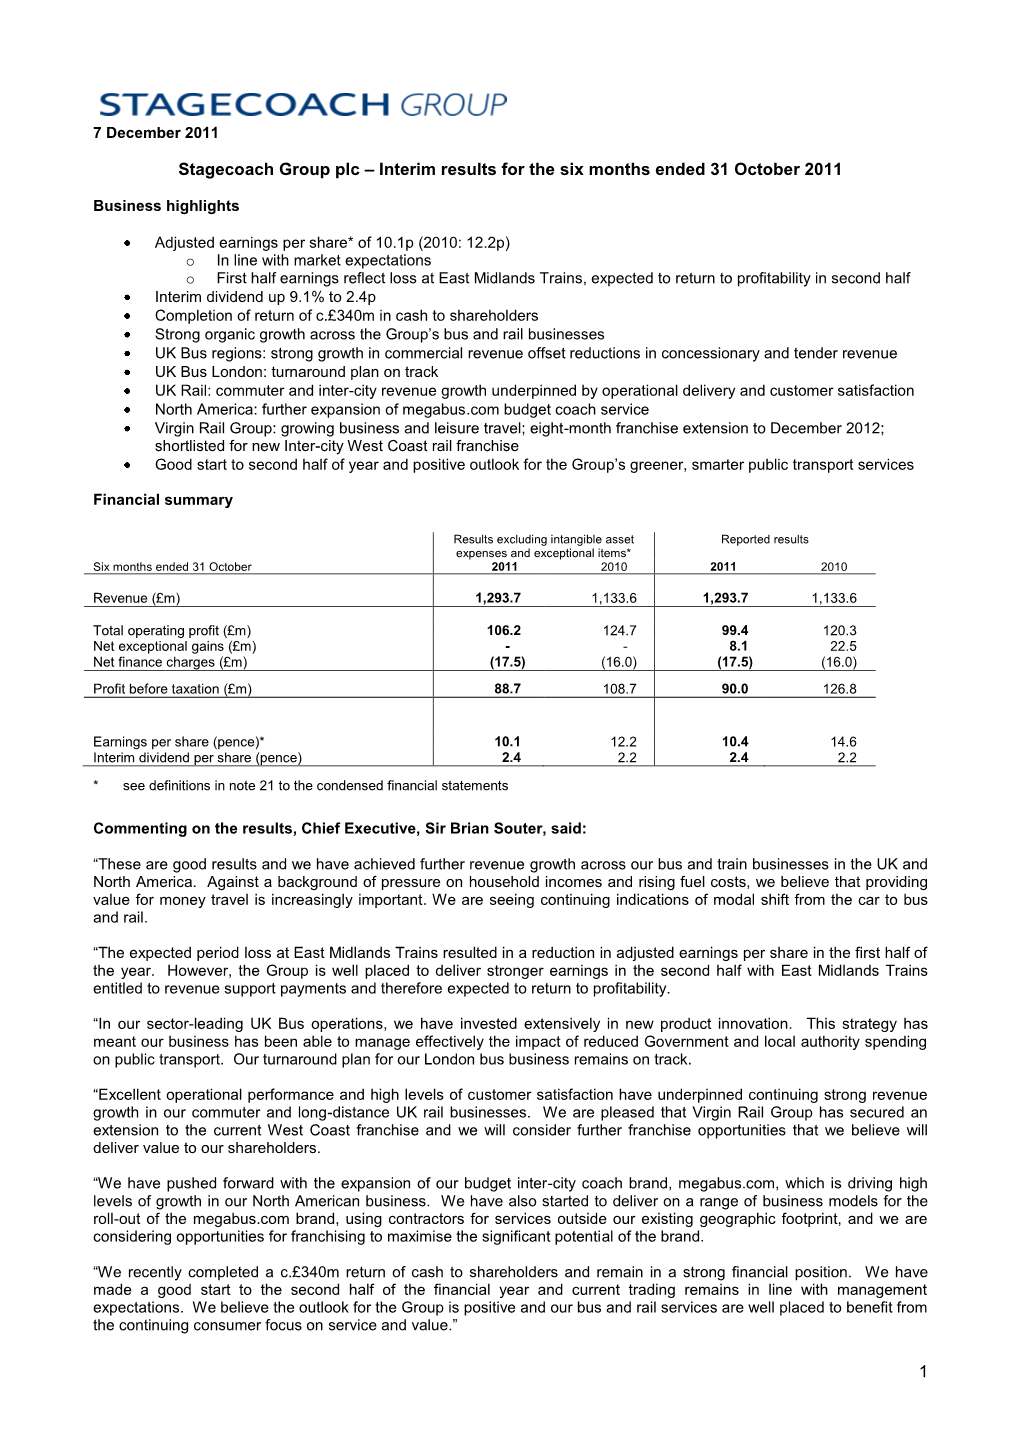 Stagecoach Group Plc – Interim Results for the Six Months Ended 31 October 2011